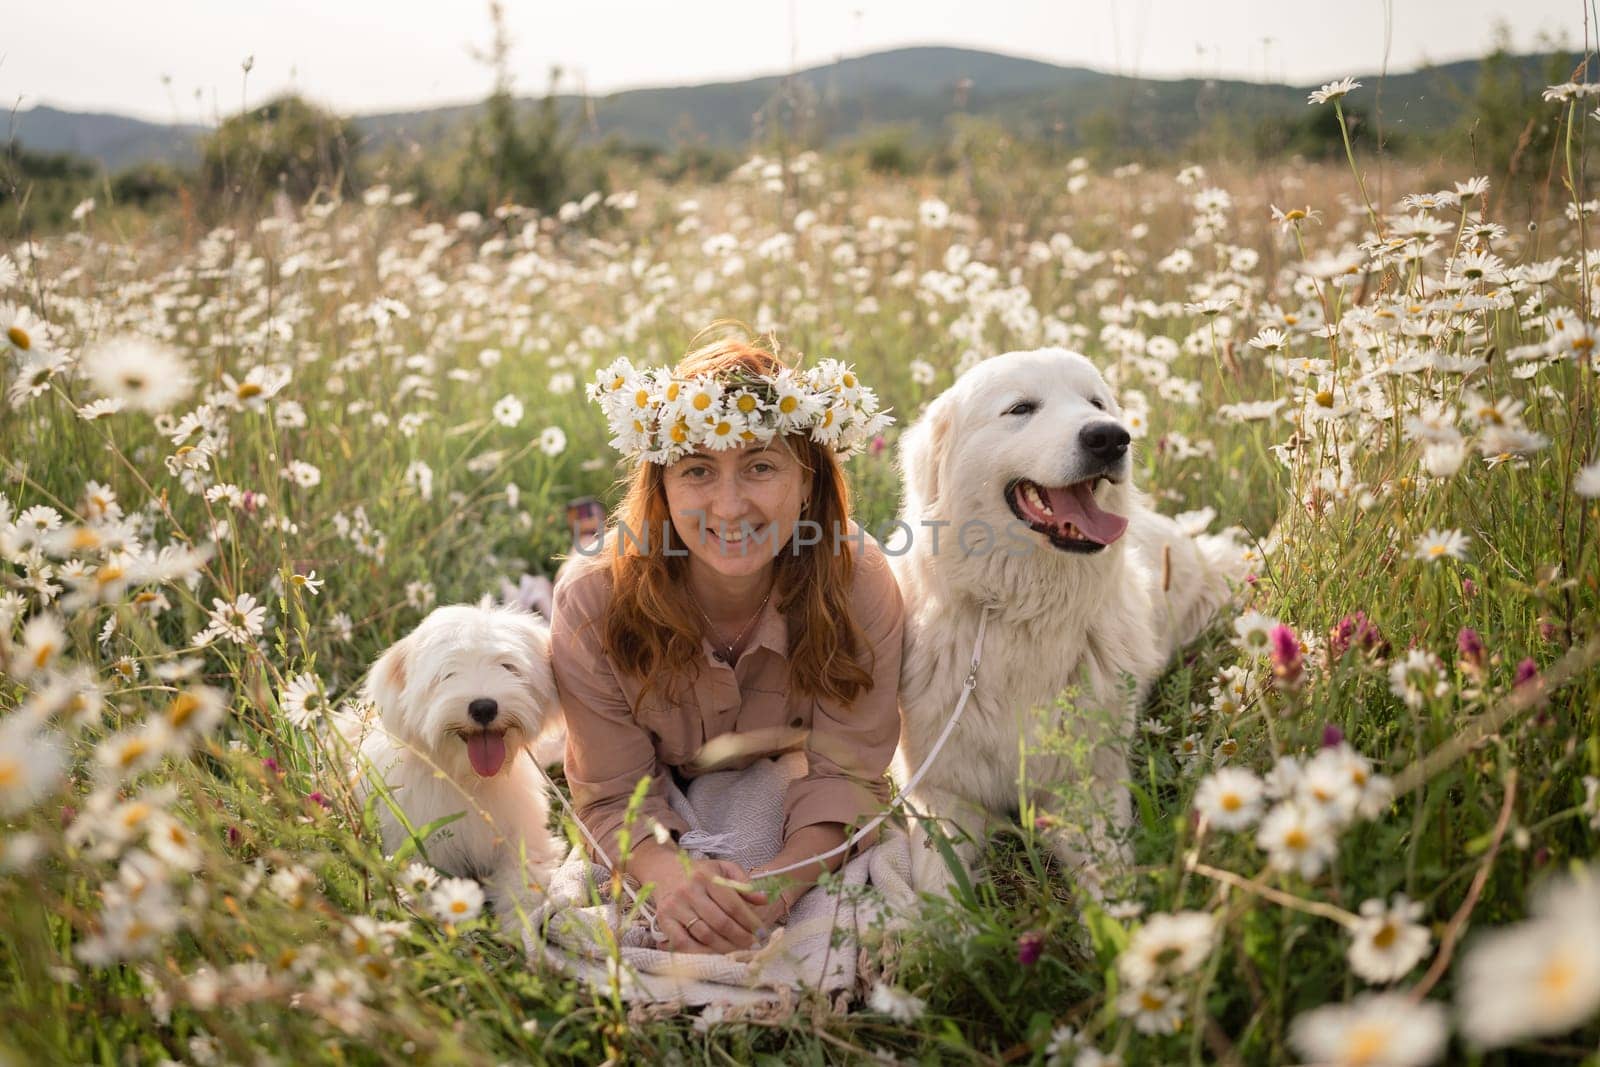 Woman dogs meadow chamomile. Woman embraces her furry friends in a serene chamomile field, surrounded by lush greenery. A heartwarming display of love and companionship between a woman and her dog